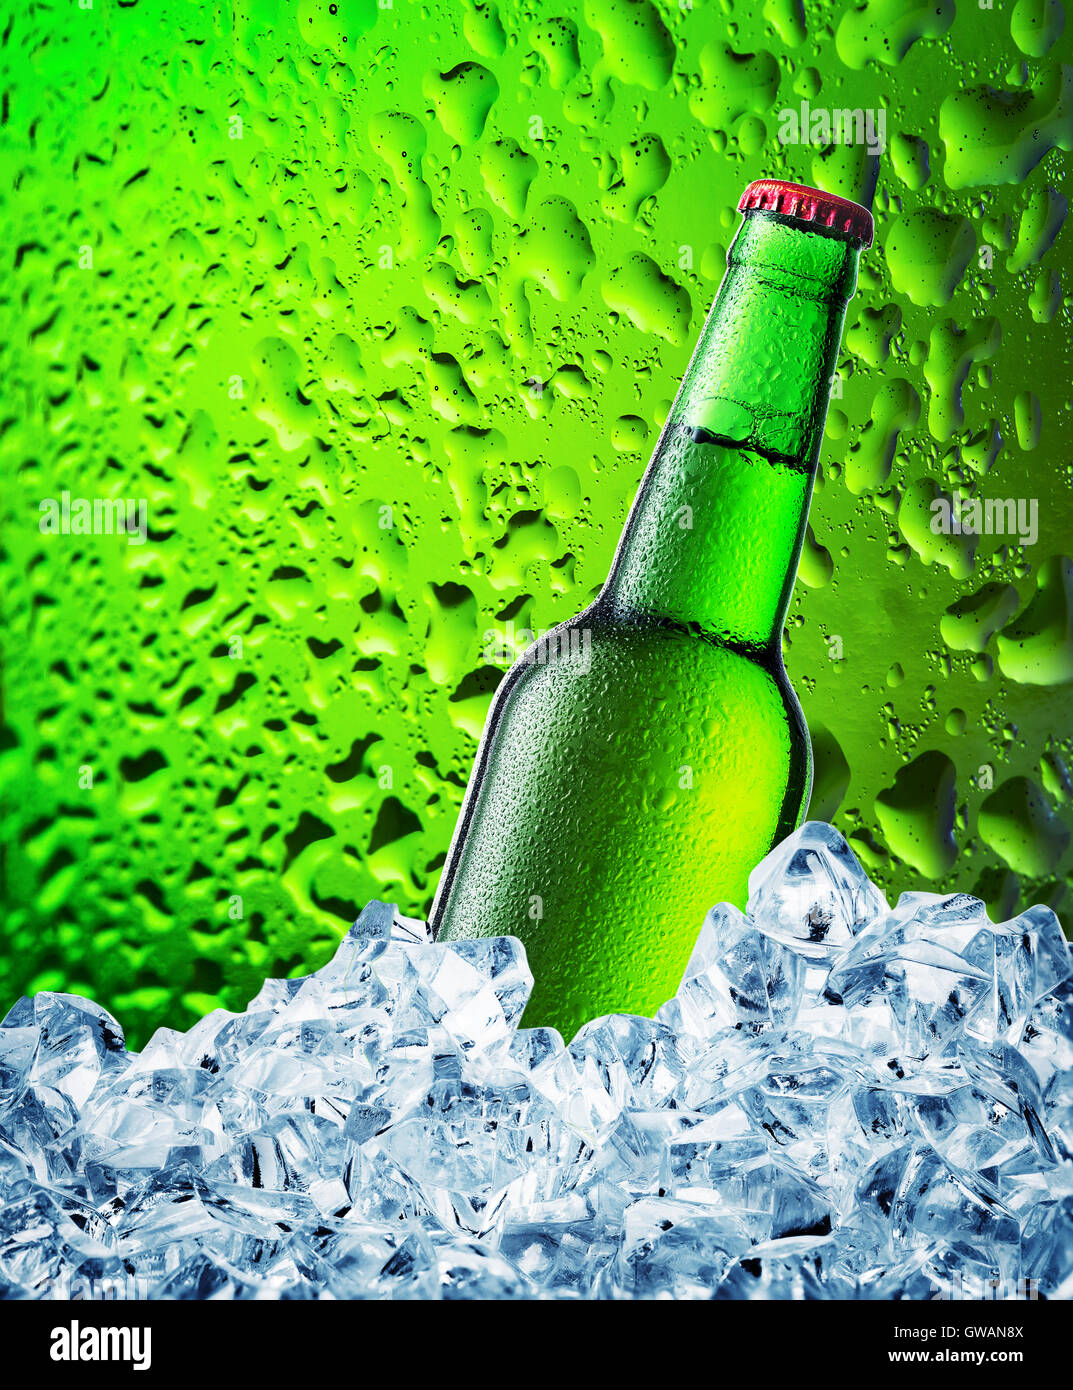 Green beer bottle in ice on green background with drops Stock Photo - Alamy